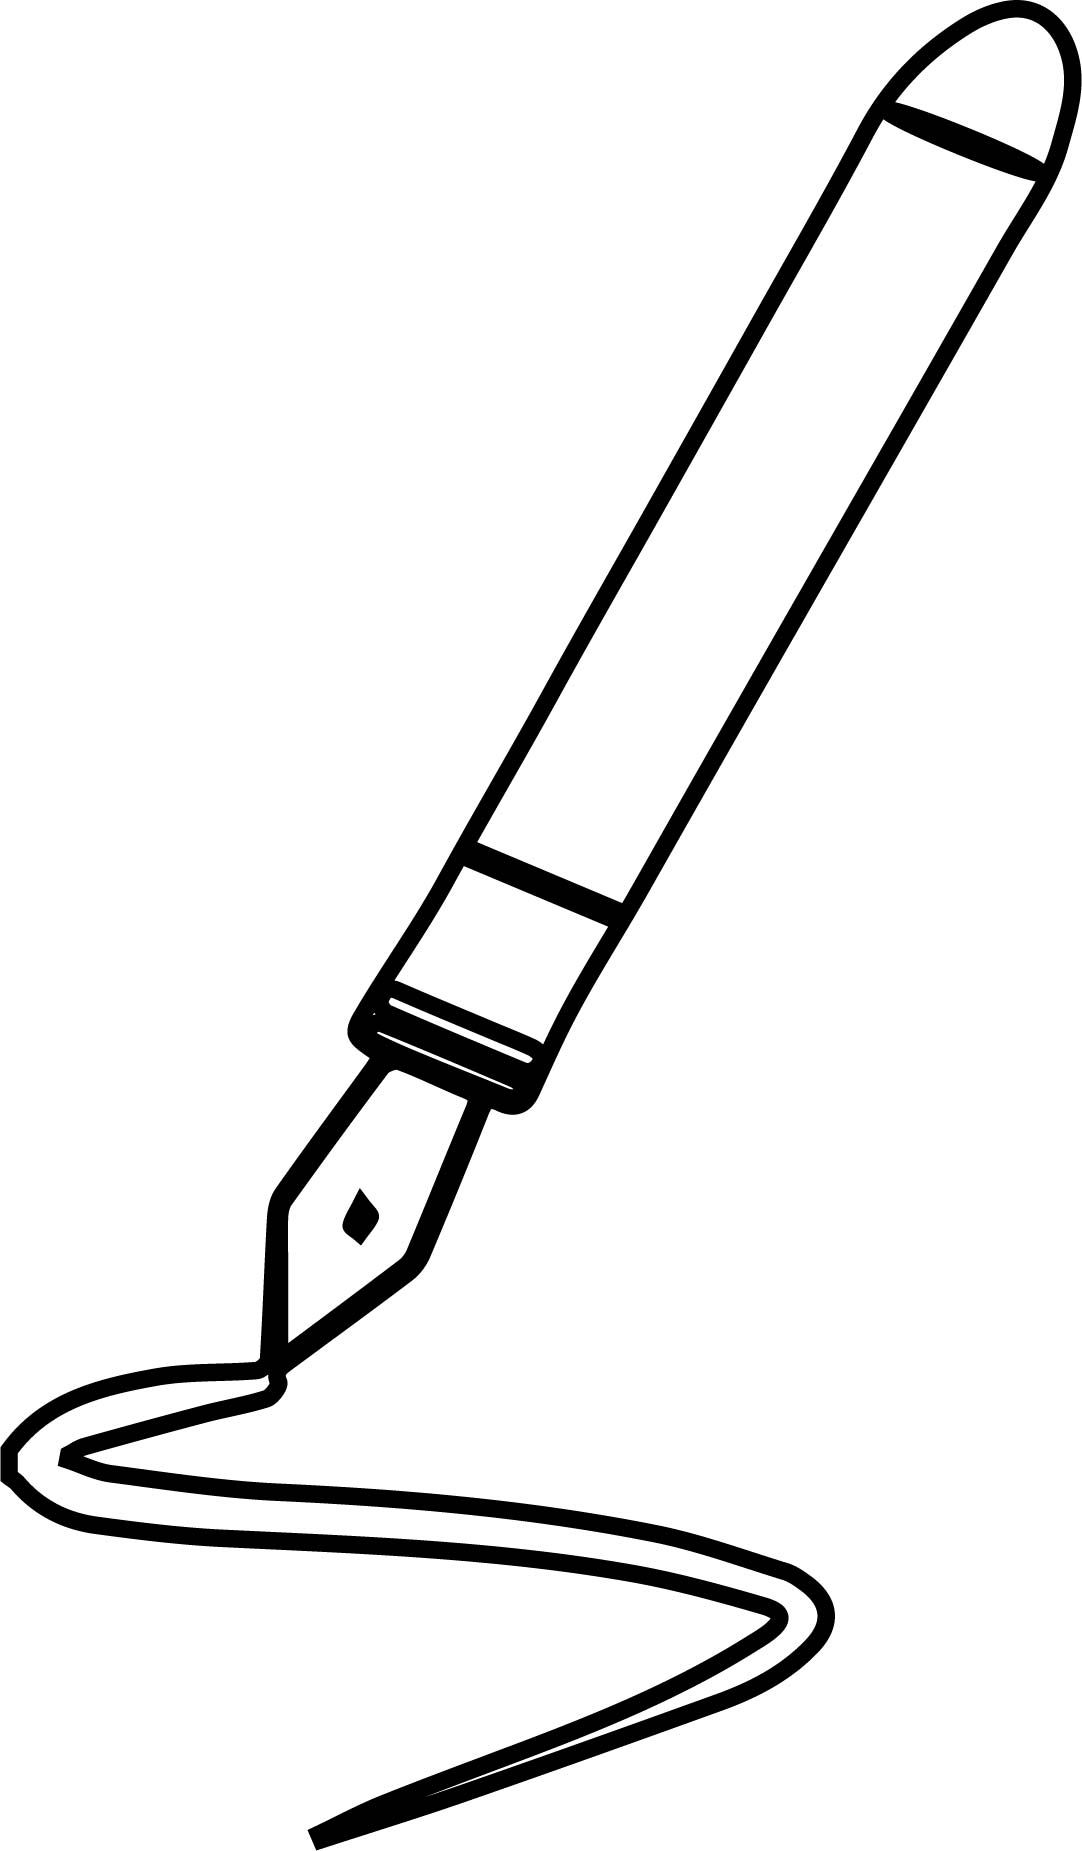 cool Just Calligraphy Pen Coloring Page | Cartoon coloring pages,  Calligraphy pens, Coloring pages